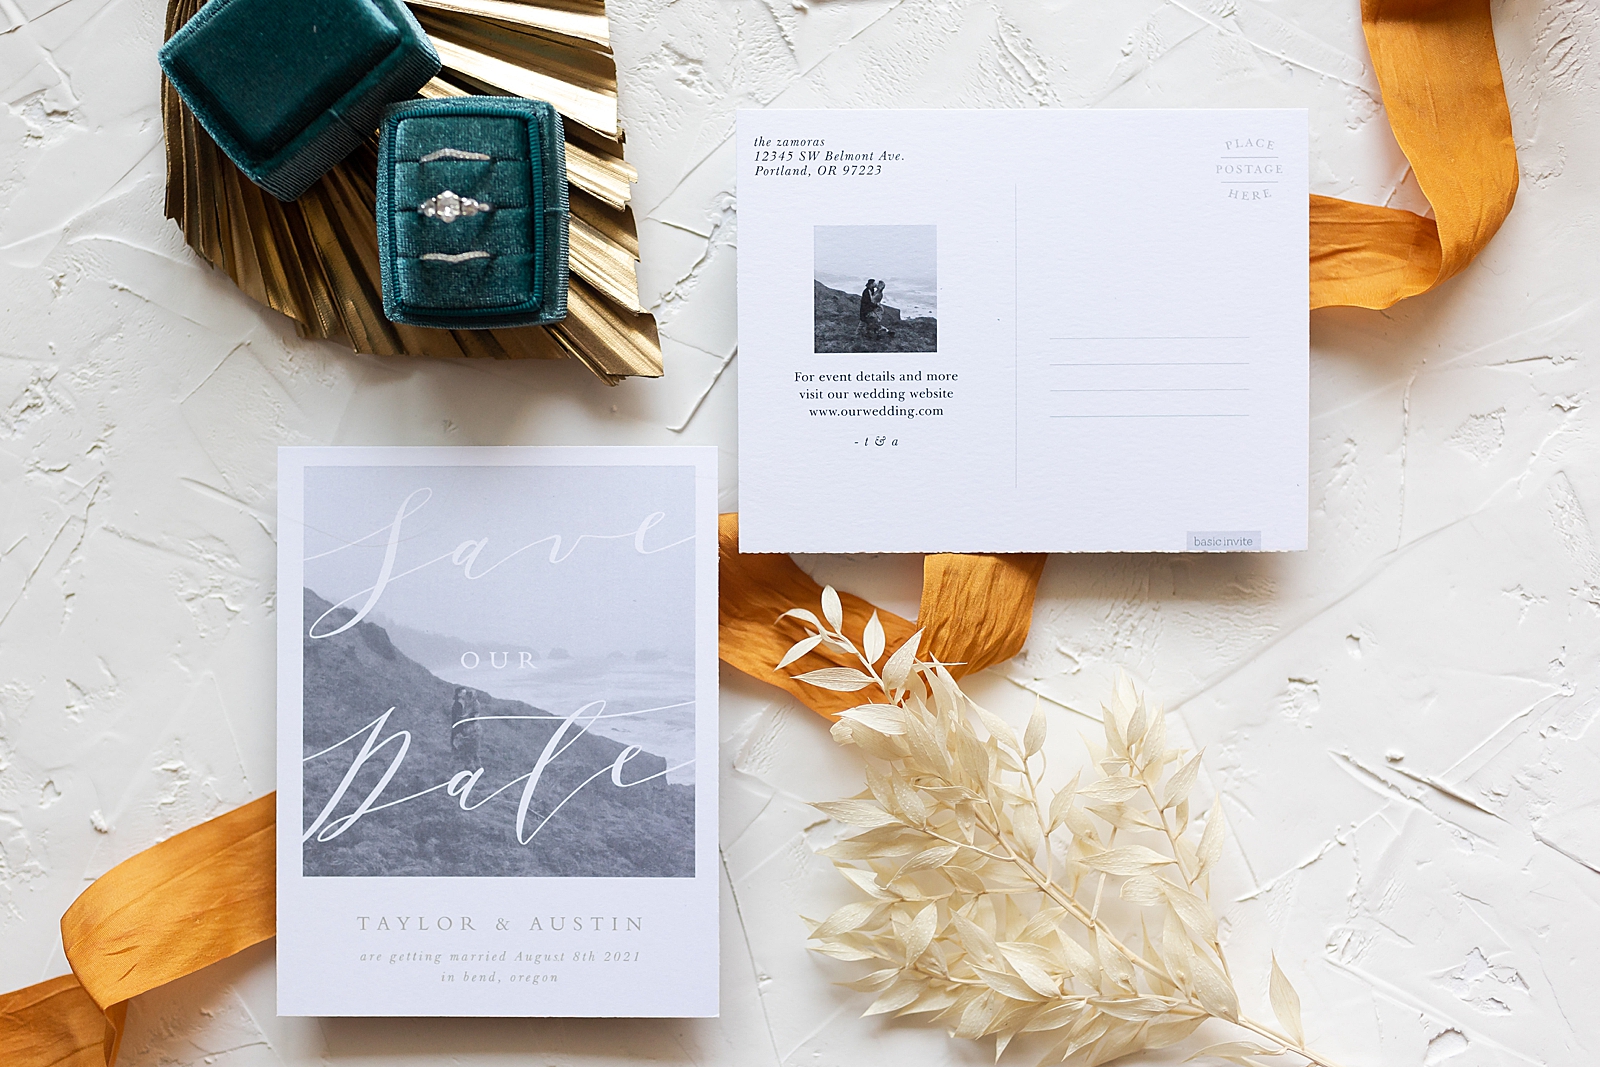 post card style save the date card on white table next to save the date card with engagement photo on it